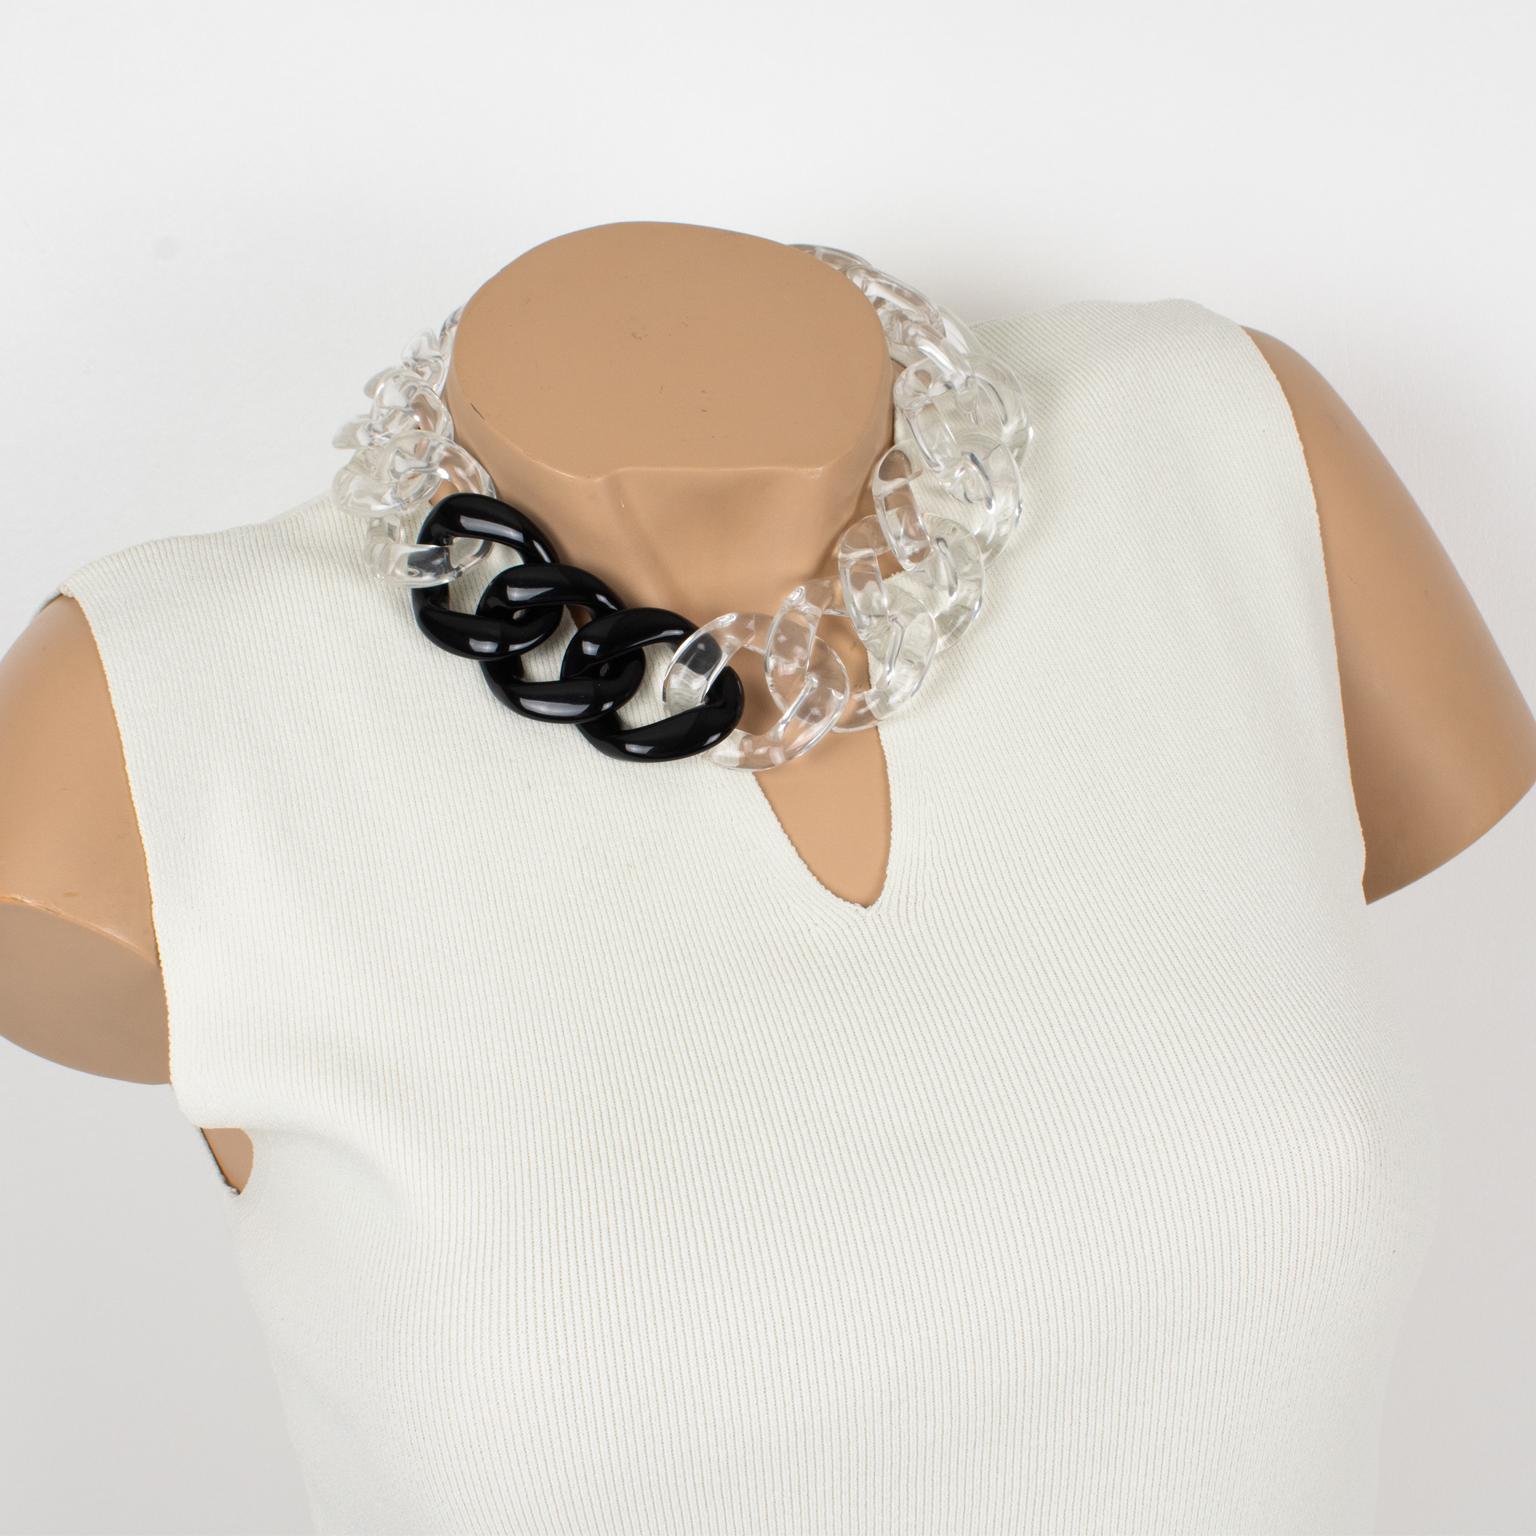 This elegant Angela Caputi, made-in-Italy choker necklace features an extra-large flat resin chain design in transparent color with black contrast. Her matching of colors is always bold and classy.
As you know, Caputi jewelry is not signed. This